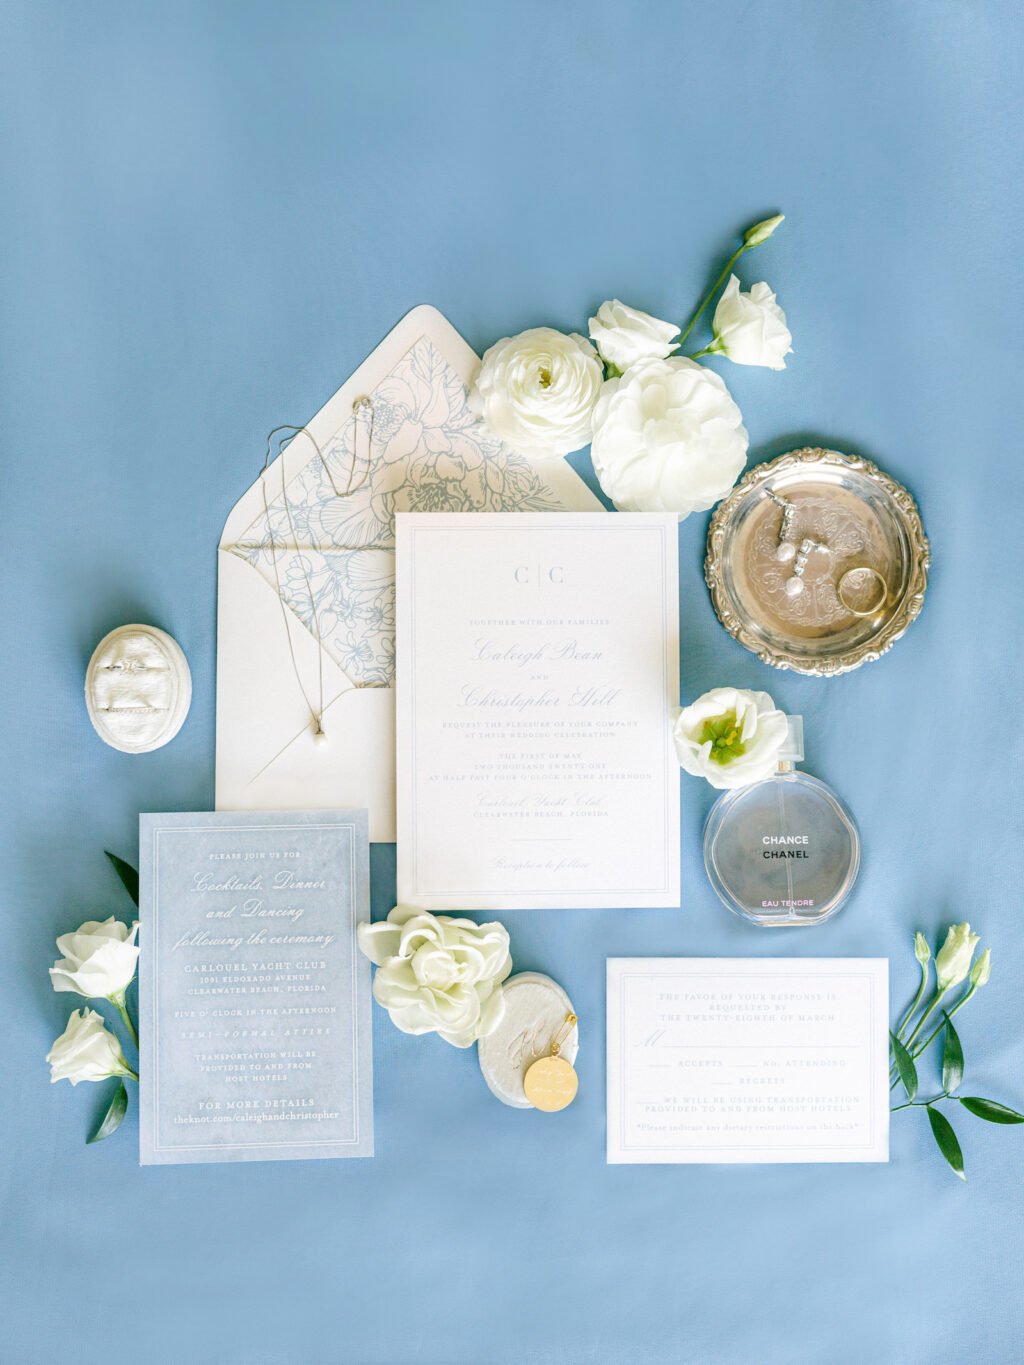 Slate Blue Florida Wedding Invitation Suite, Ivory Stationery with Dusty Blue Accents, Oval Ring Box, Chance Chanel Perfume Bottle, Pearl Teardrop Earrings, Pearl Pendent Necklace | Tampa Bay Florist Bruce Wayne Florals